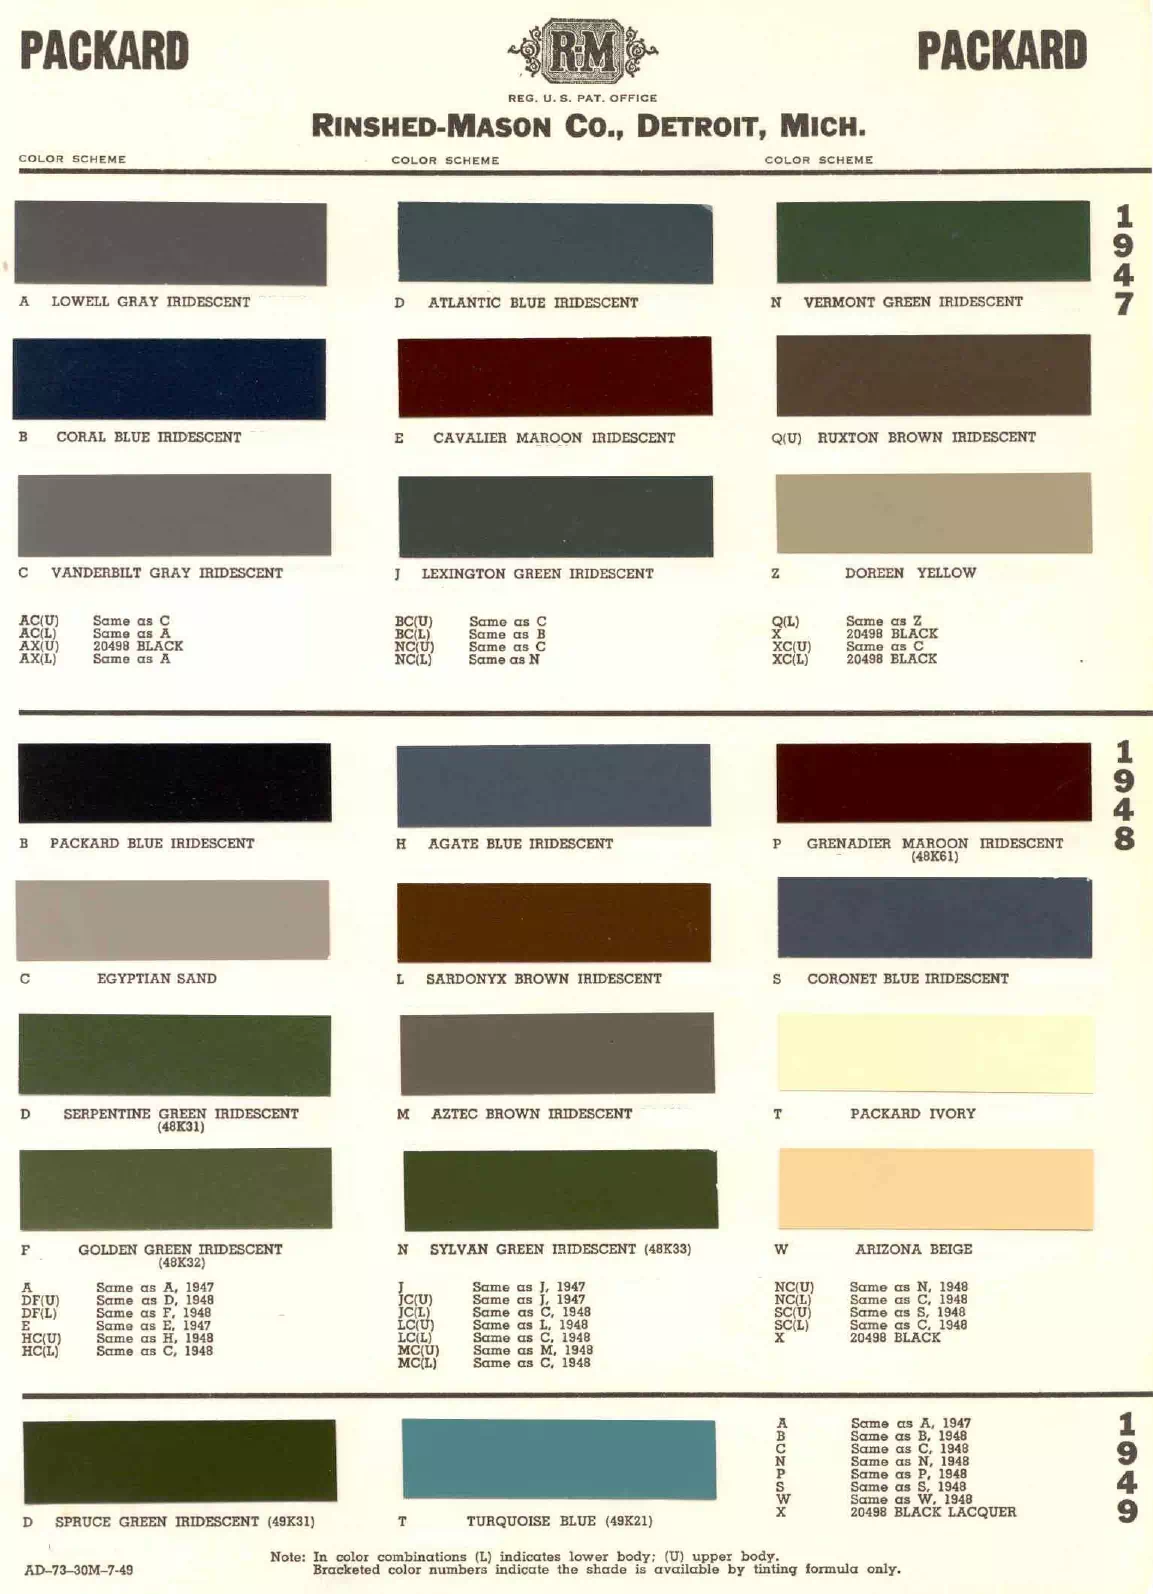 colors and ordering codes for those colors used the vehicles for the years listed